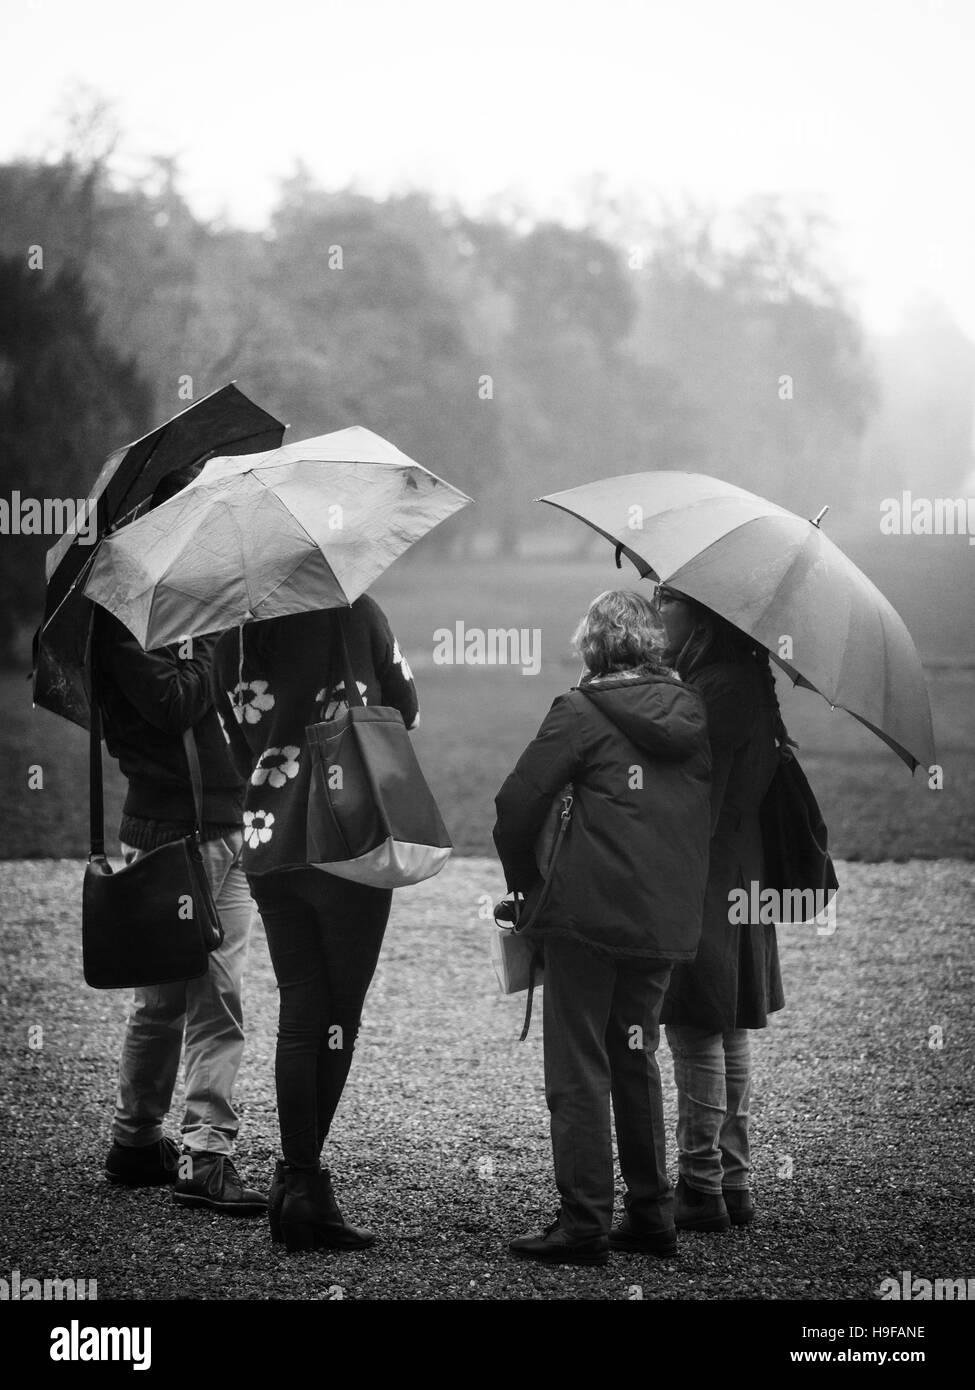 Four women chatting protecting themselves from the rain, Monza, Italy Stock Photo